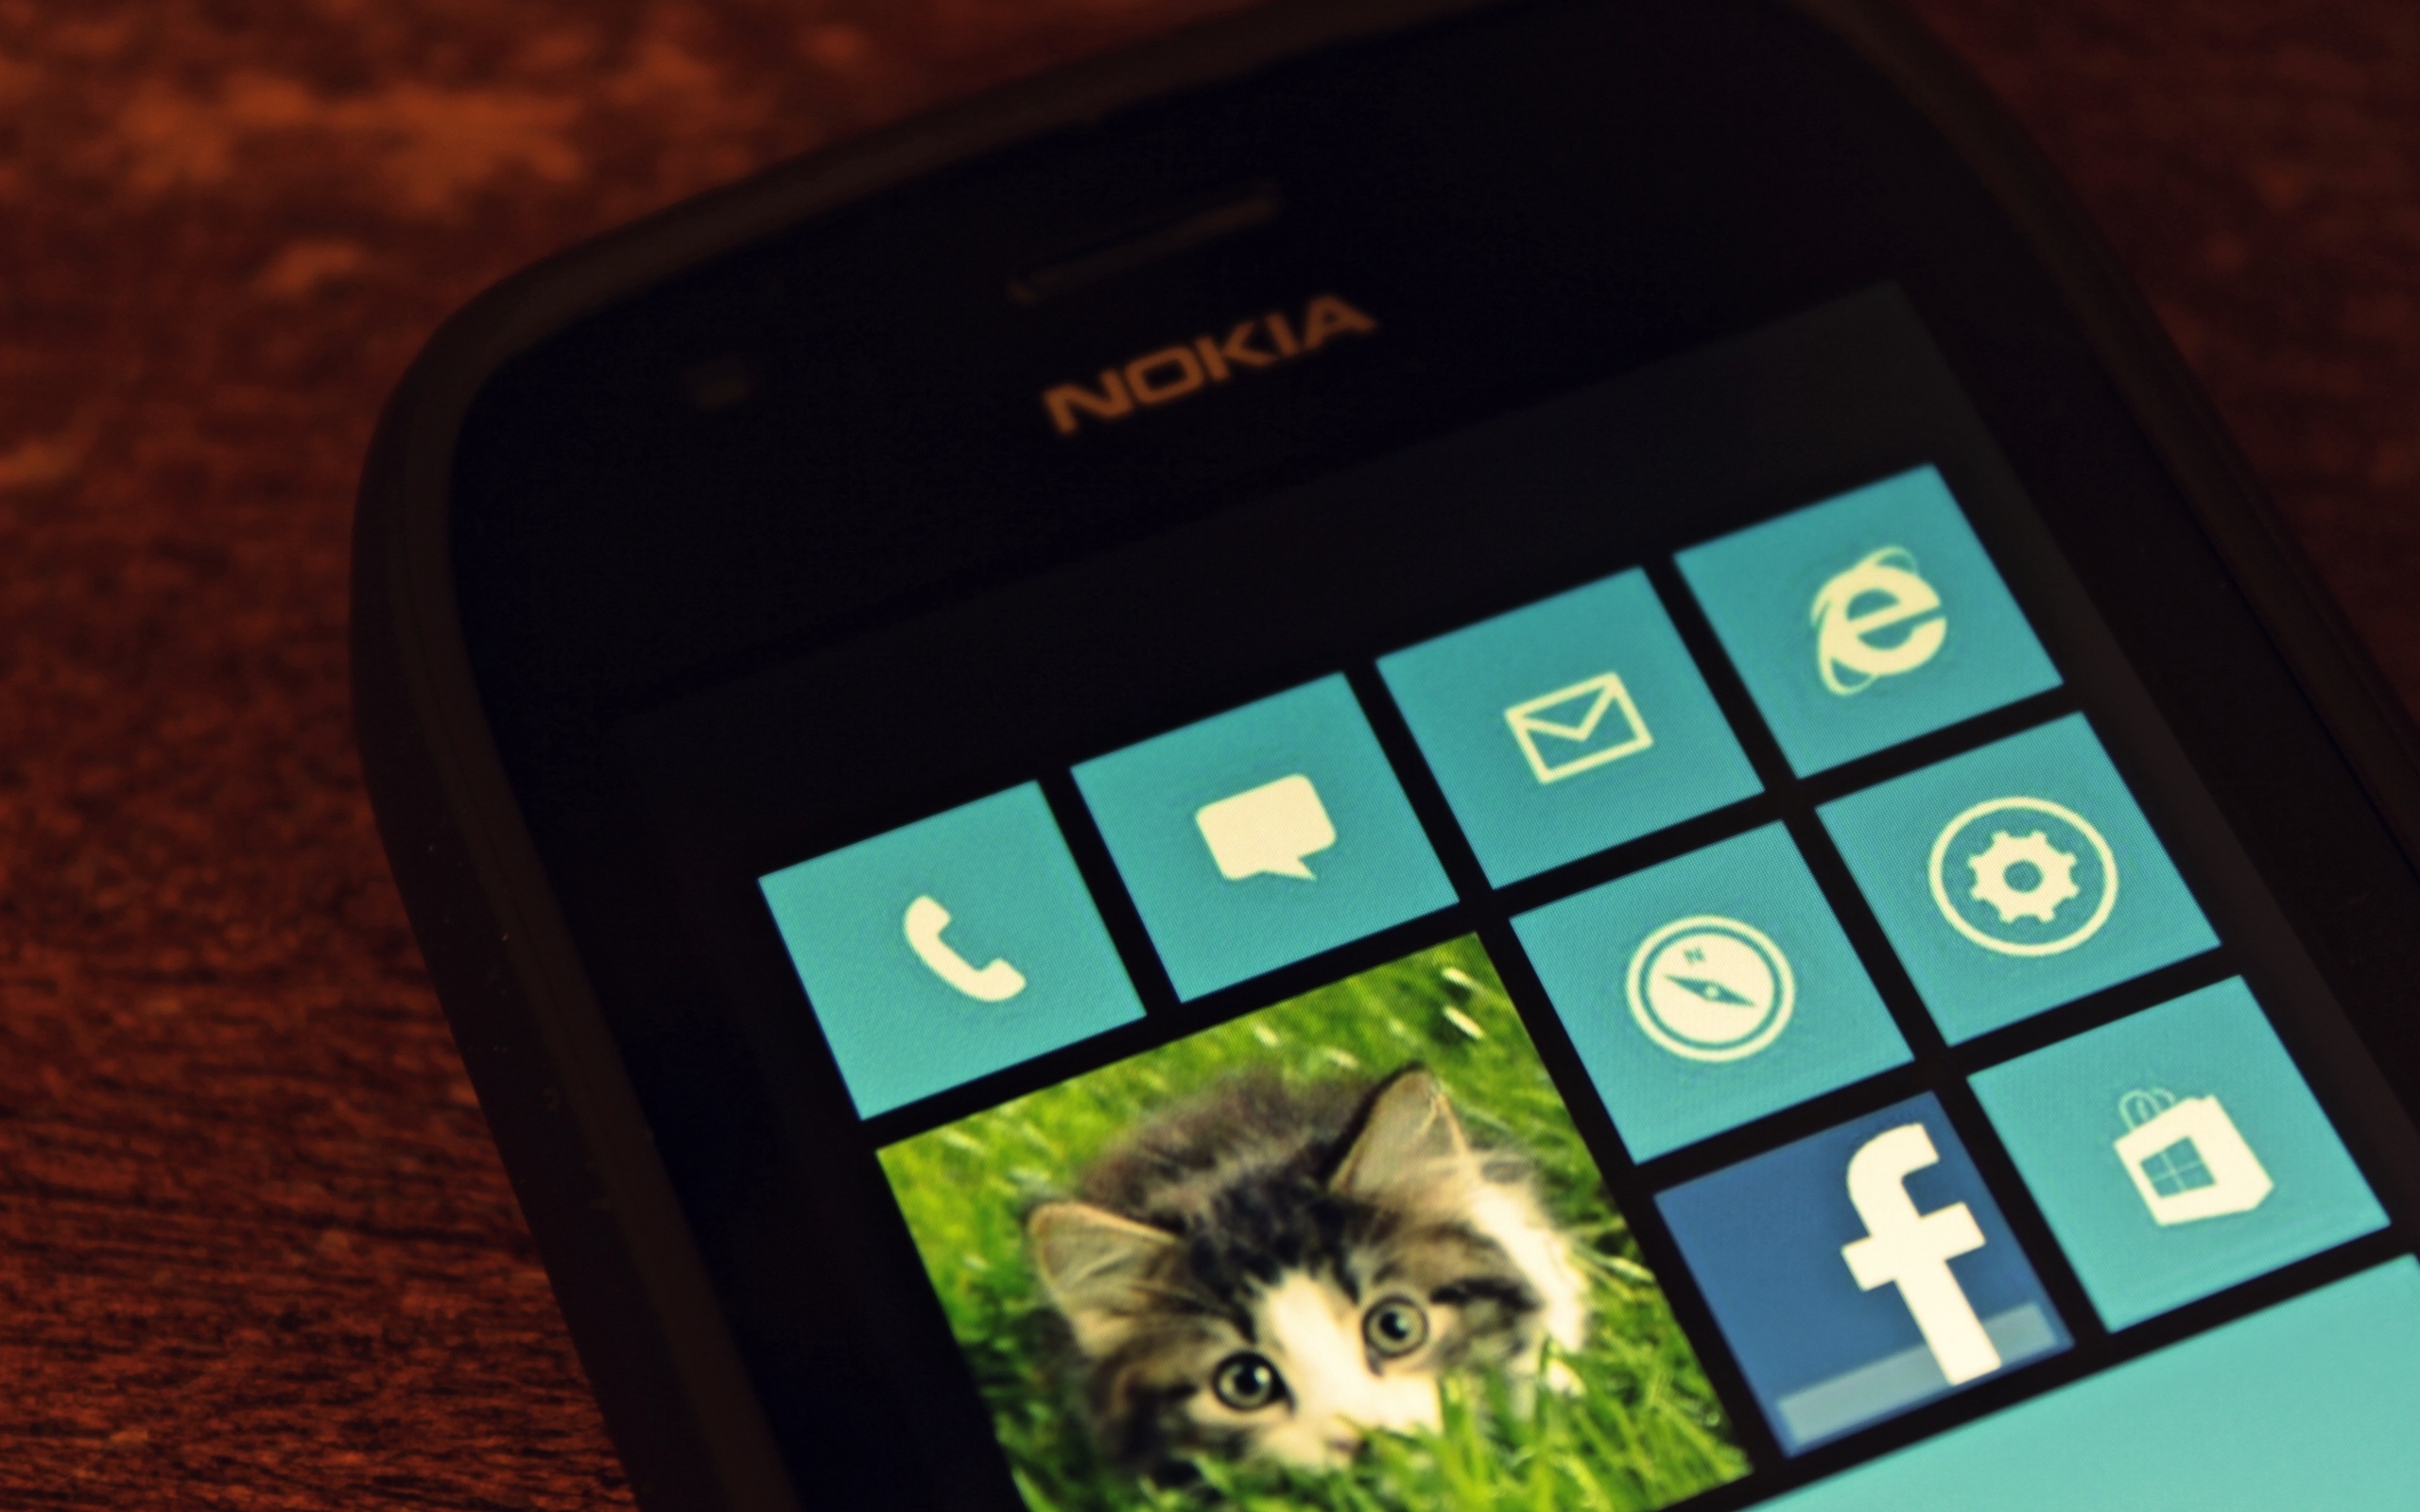 Wallpaper Wp8 Nokia Touch Screen Mobile